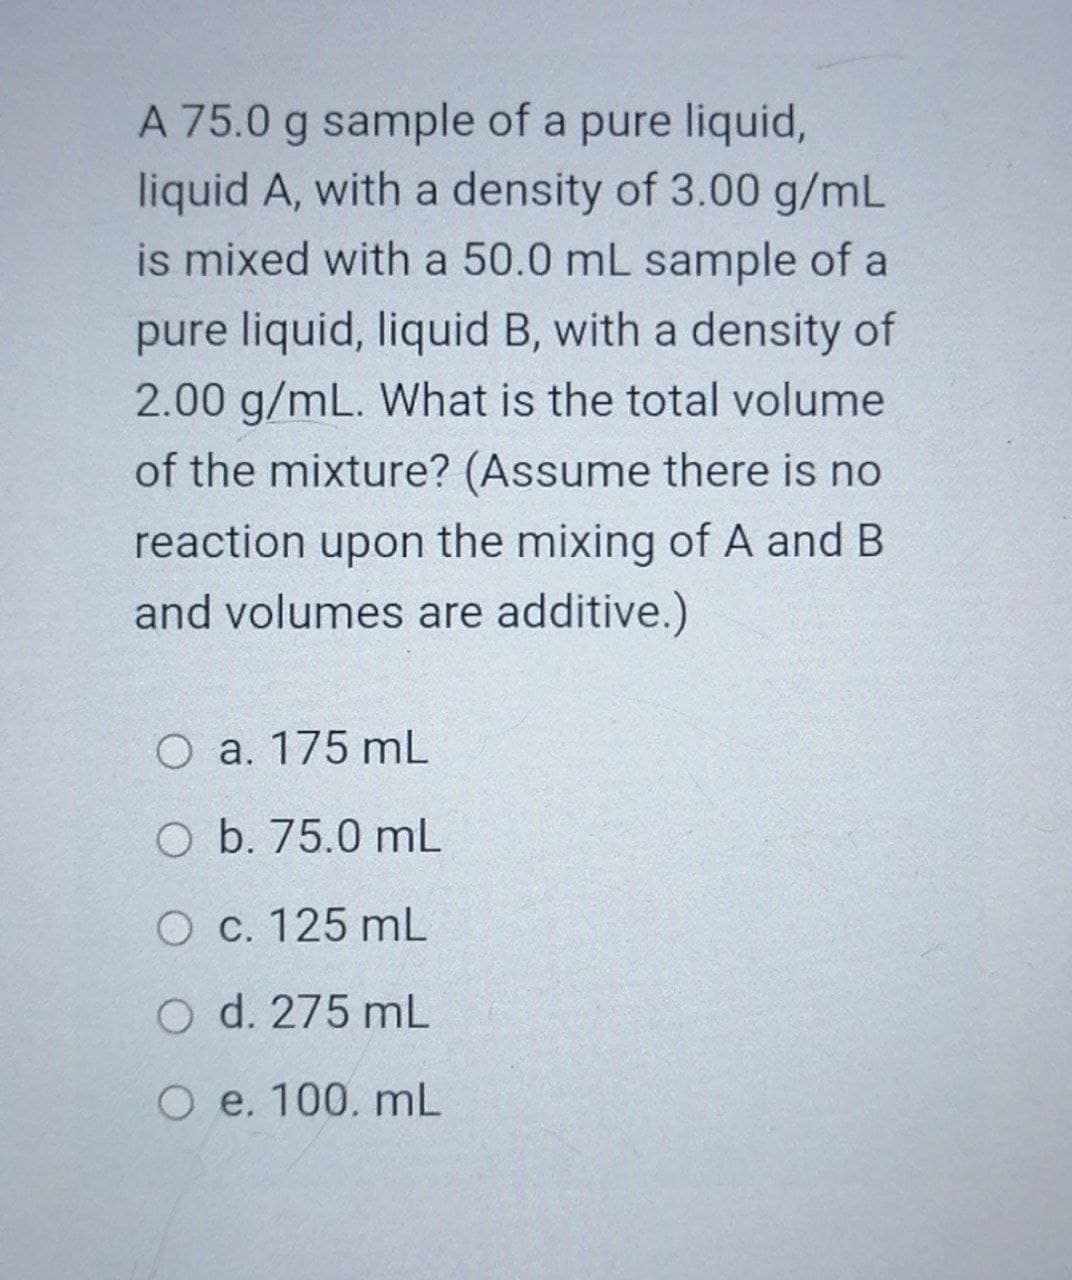 A 75.0 g sample of a pure liquid,
liquid A, with a density of 3.00 g/mL
is mixed with a 50.0 mL sample of a
pure liquid, liquid B, with a density of
2.00 g/mL. What is the total volume
of the mixture? (Assume there is no
reaction upon the mixing of A and B
and volumes are additive.)
O a. 175 mL
O b. 75.0 mL
O c. 125 mL
O d. 275 mL
O e. 100. mL
